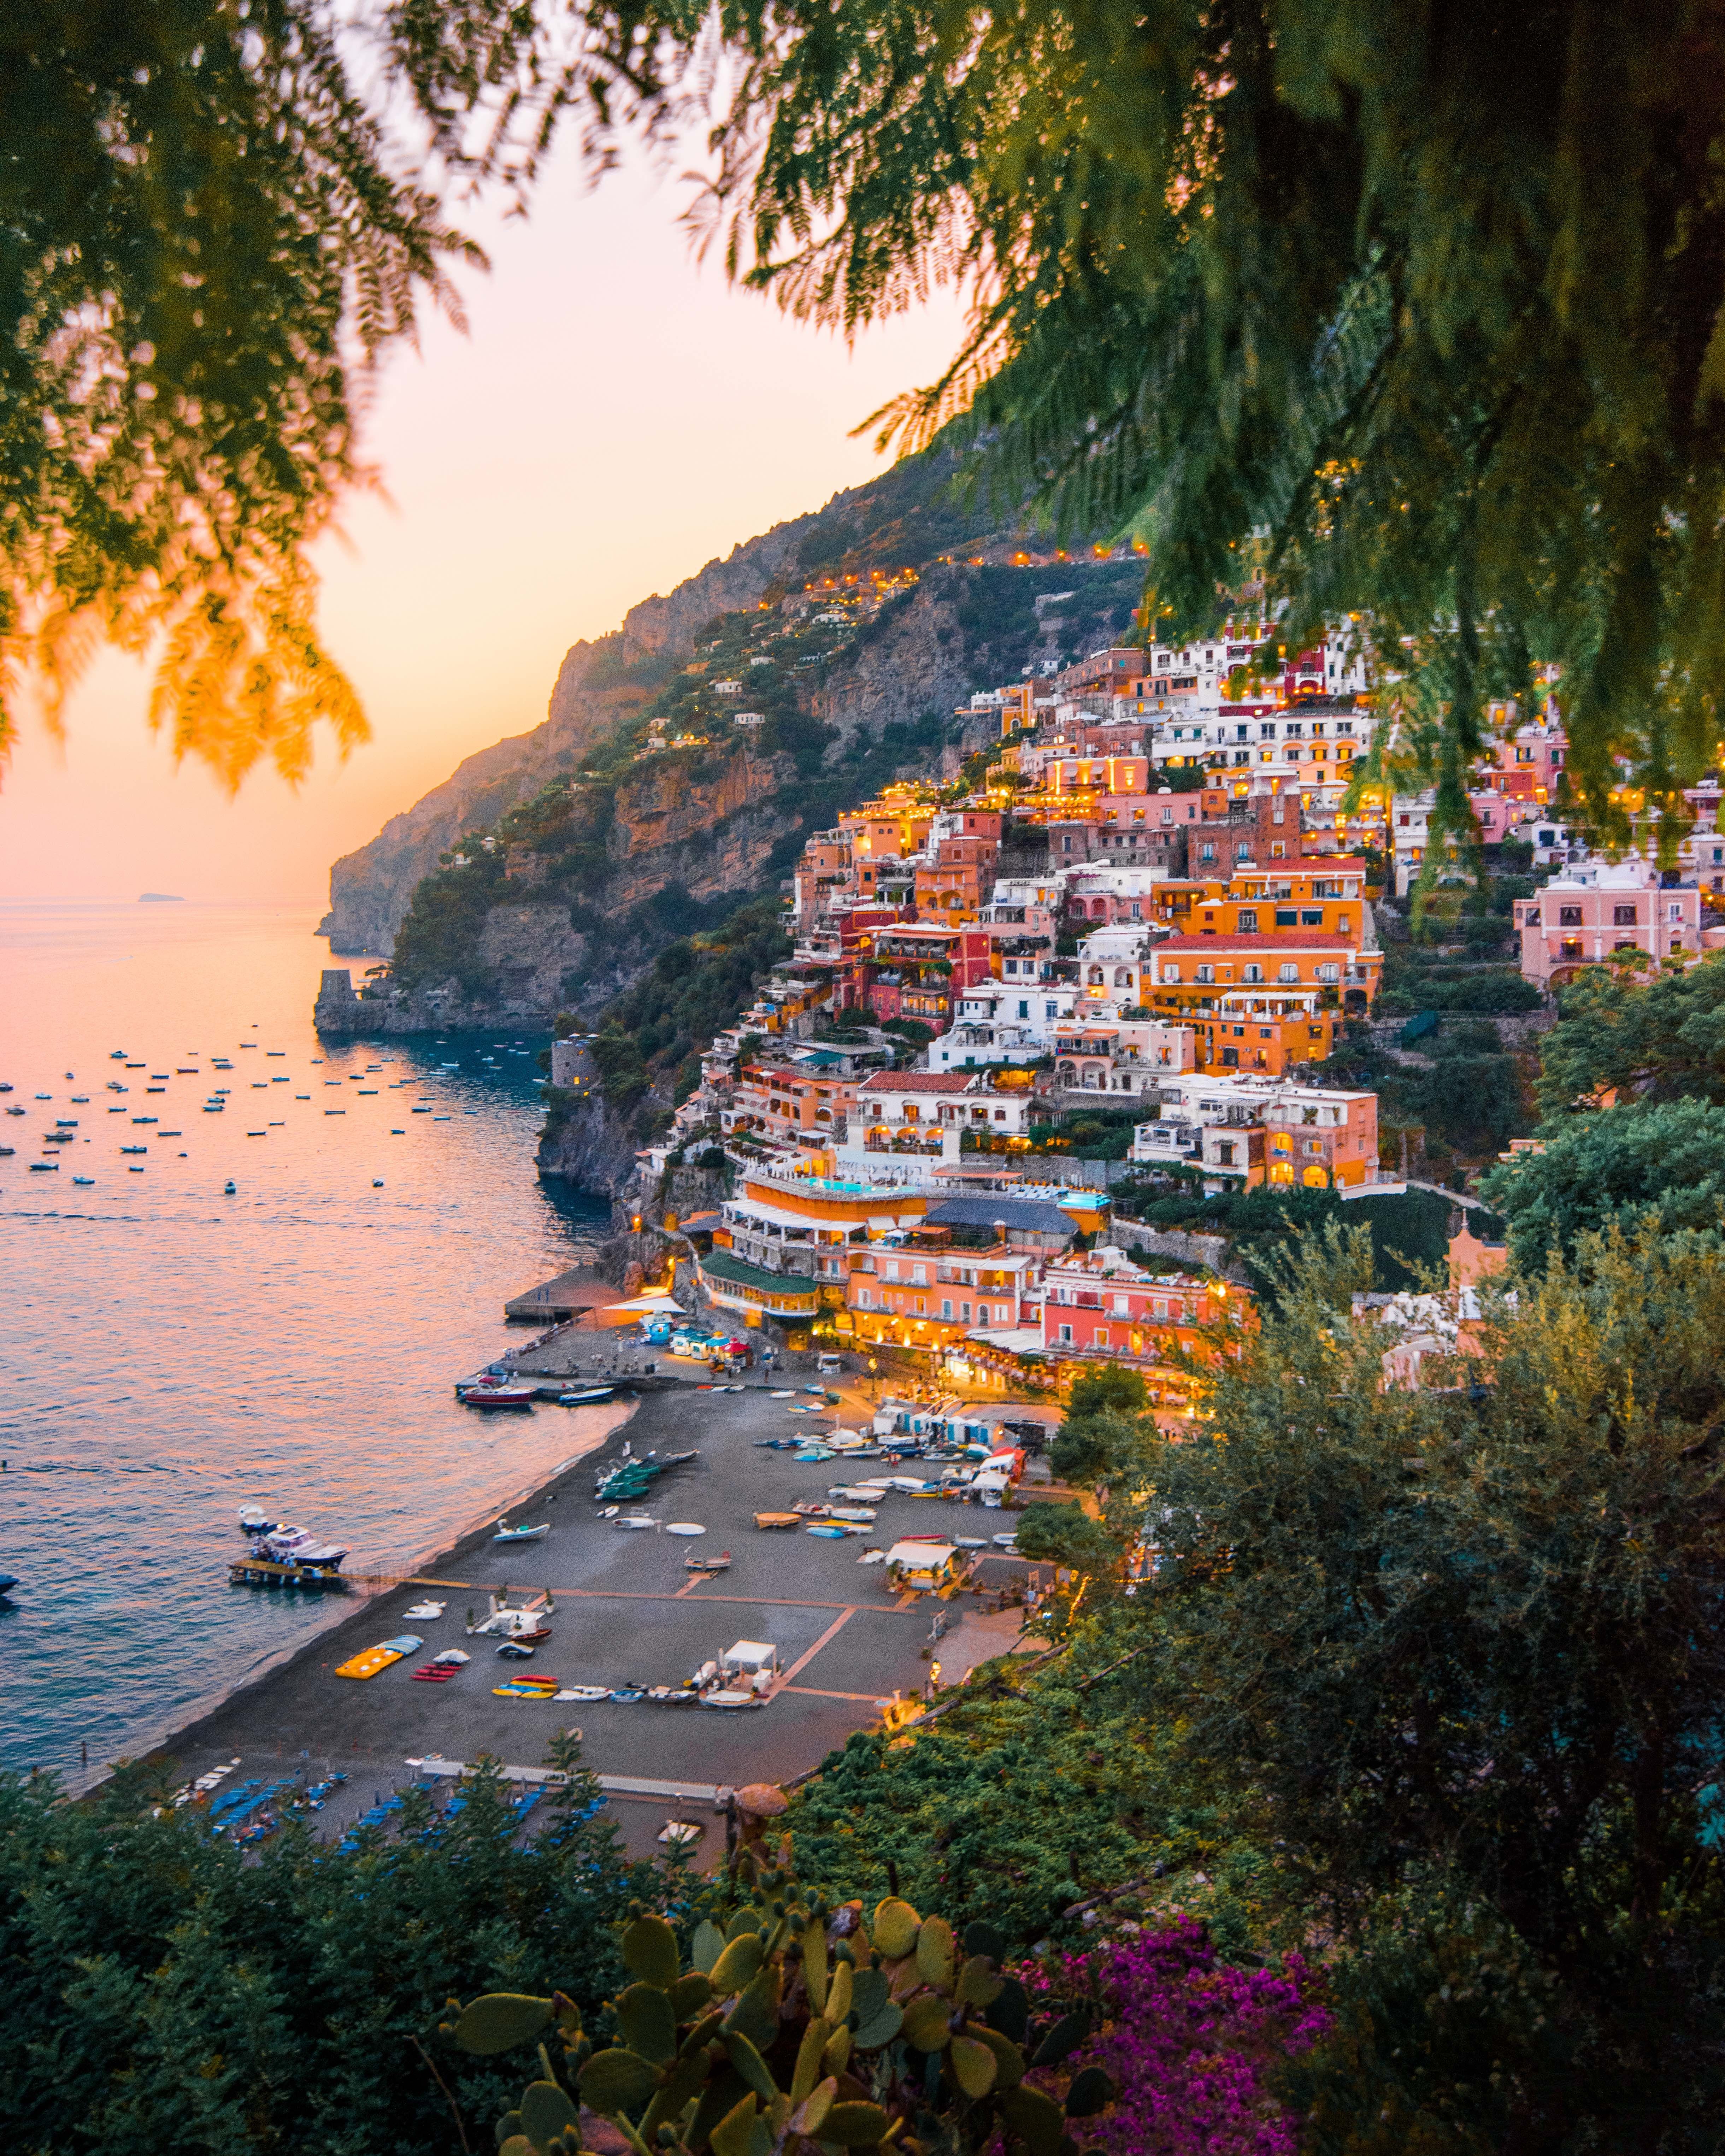 A city on the water at sunset - Travel, Italy